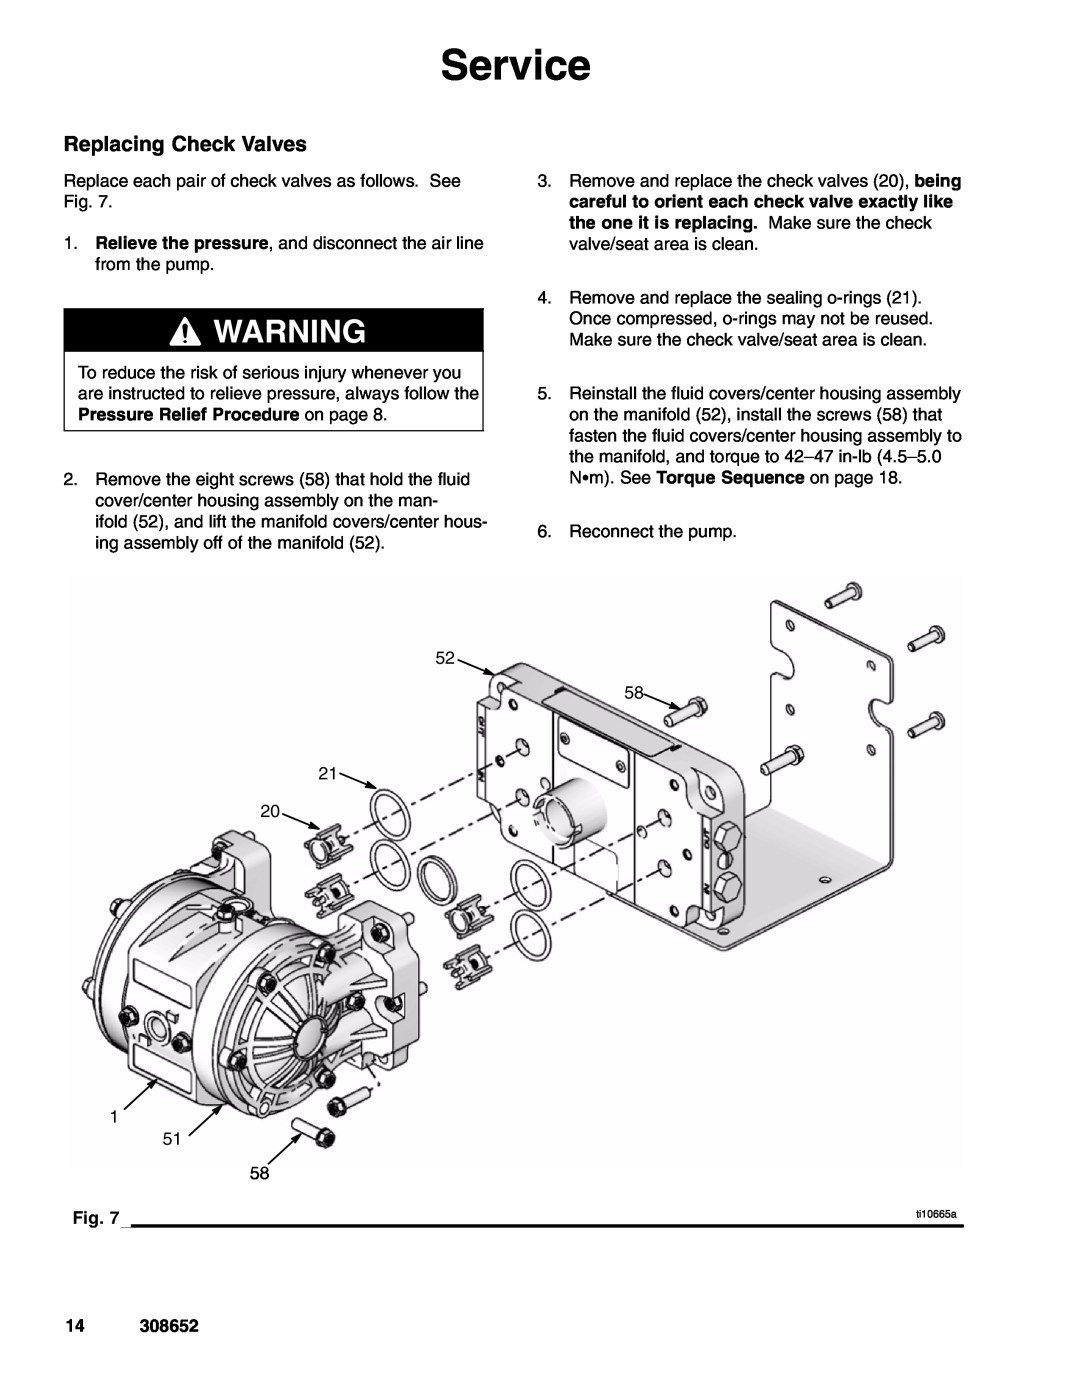 Graco 308652Y important safety instructions Replacing Check Valves, Service, ti10665a 